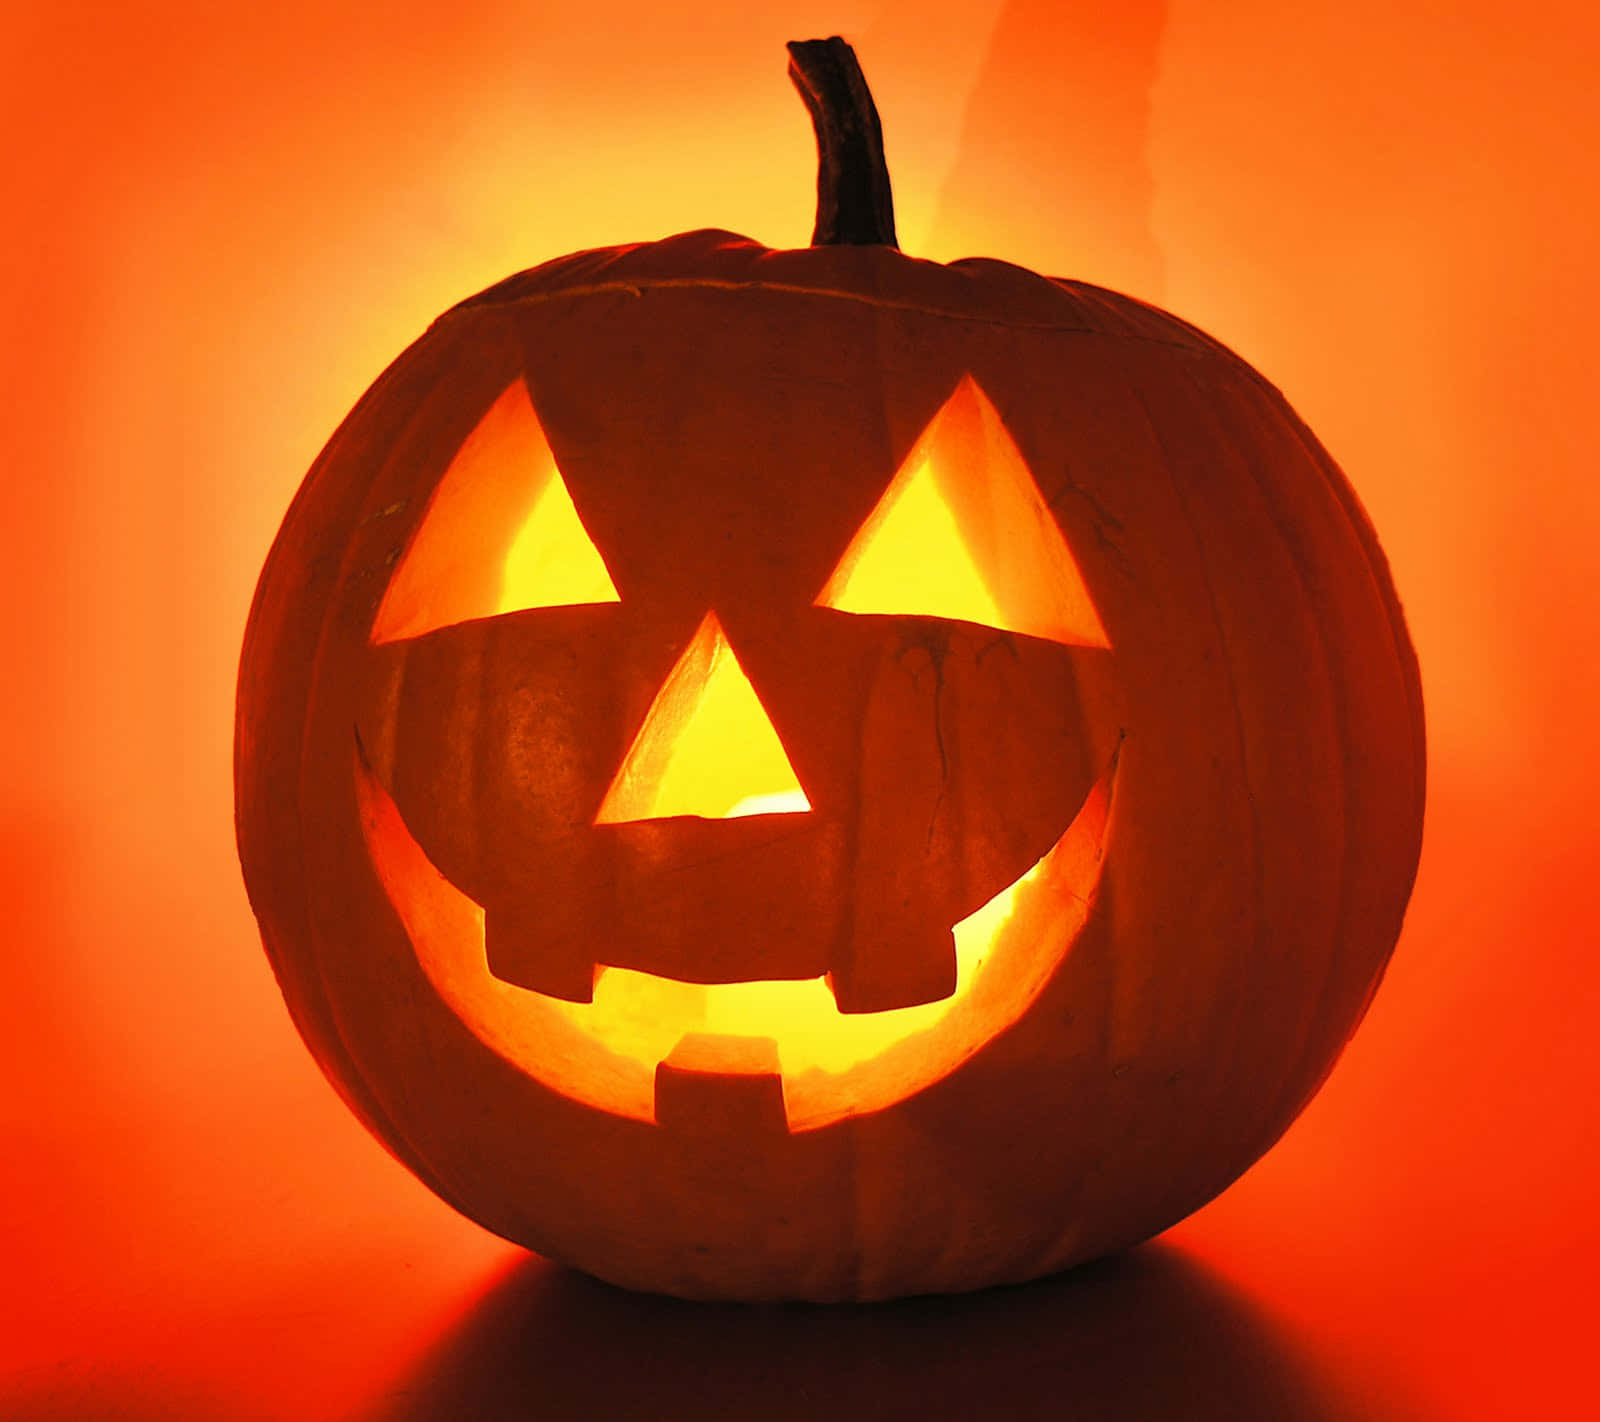 Happy Halloween! This Jack O'Lantern is Carved with a Spooky Smiley Face.